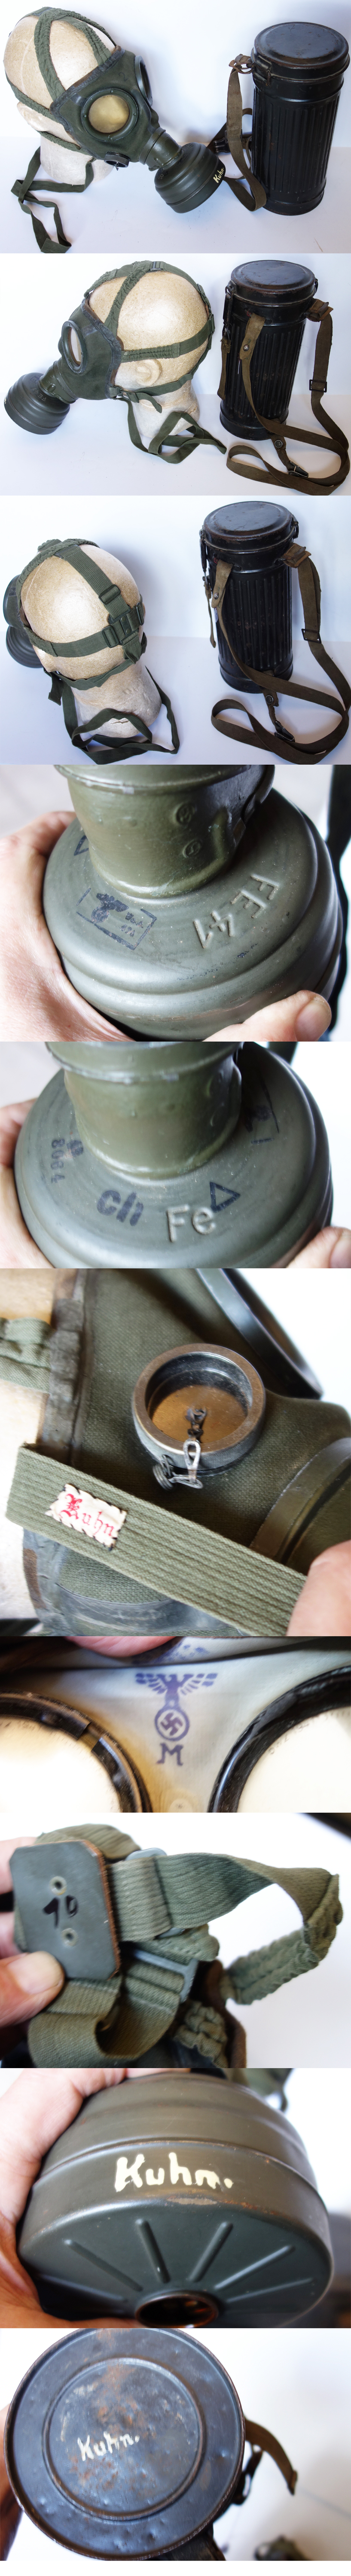 Navy Gas Mask & Canister